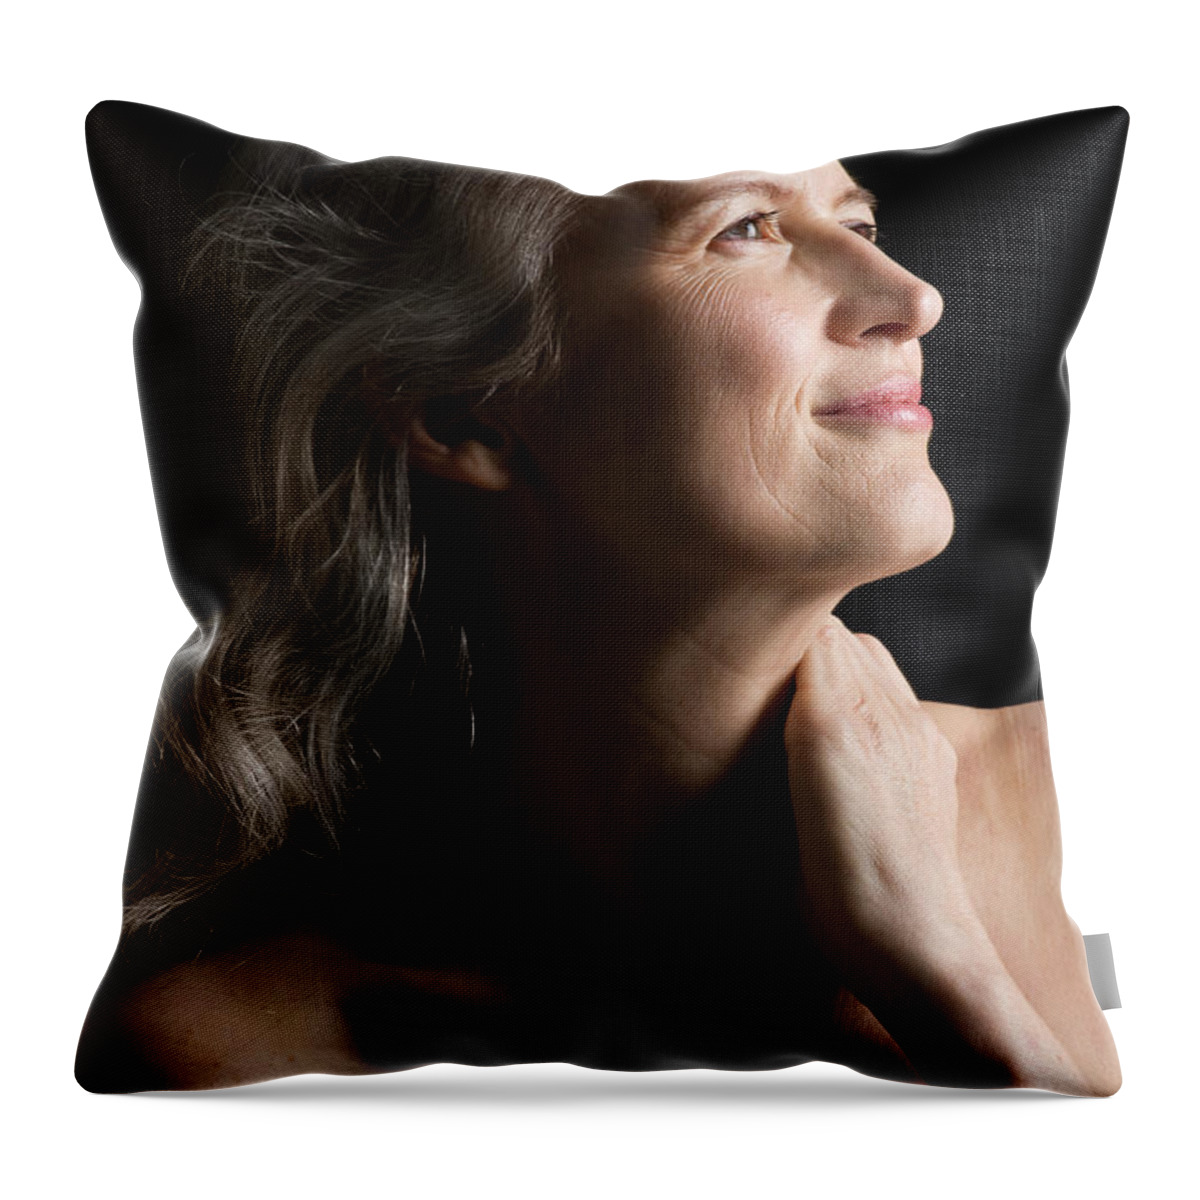 Mature Adult Throw Pillow featuring the photograph Dramatic Portrait Of Mid-aged Woman by Leland Bobbe